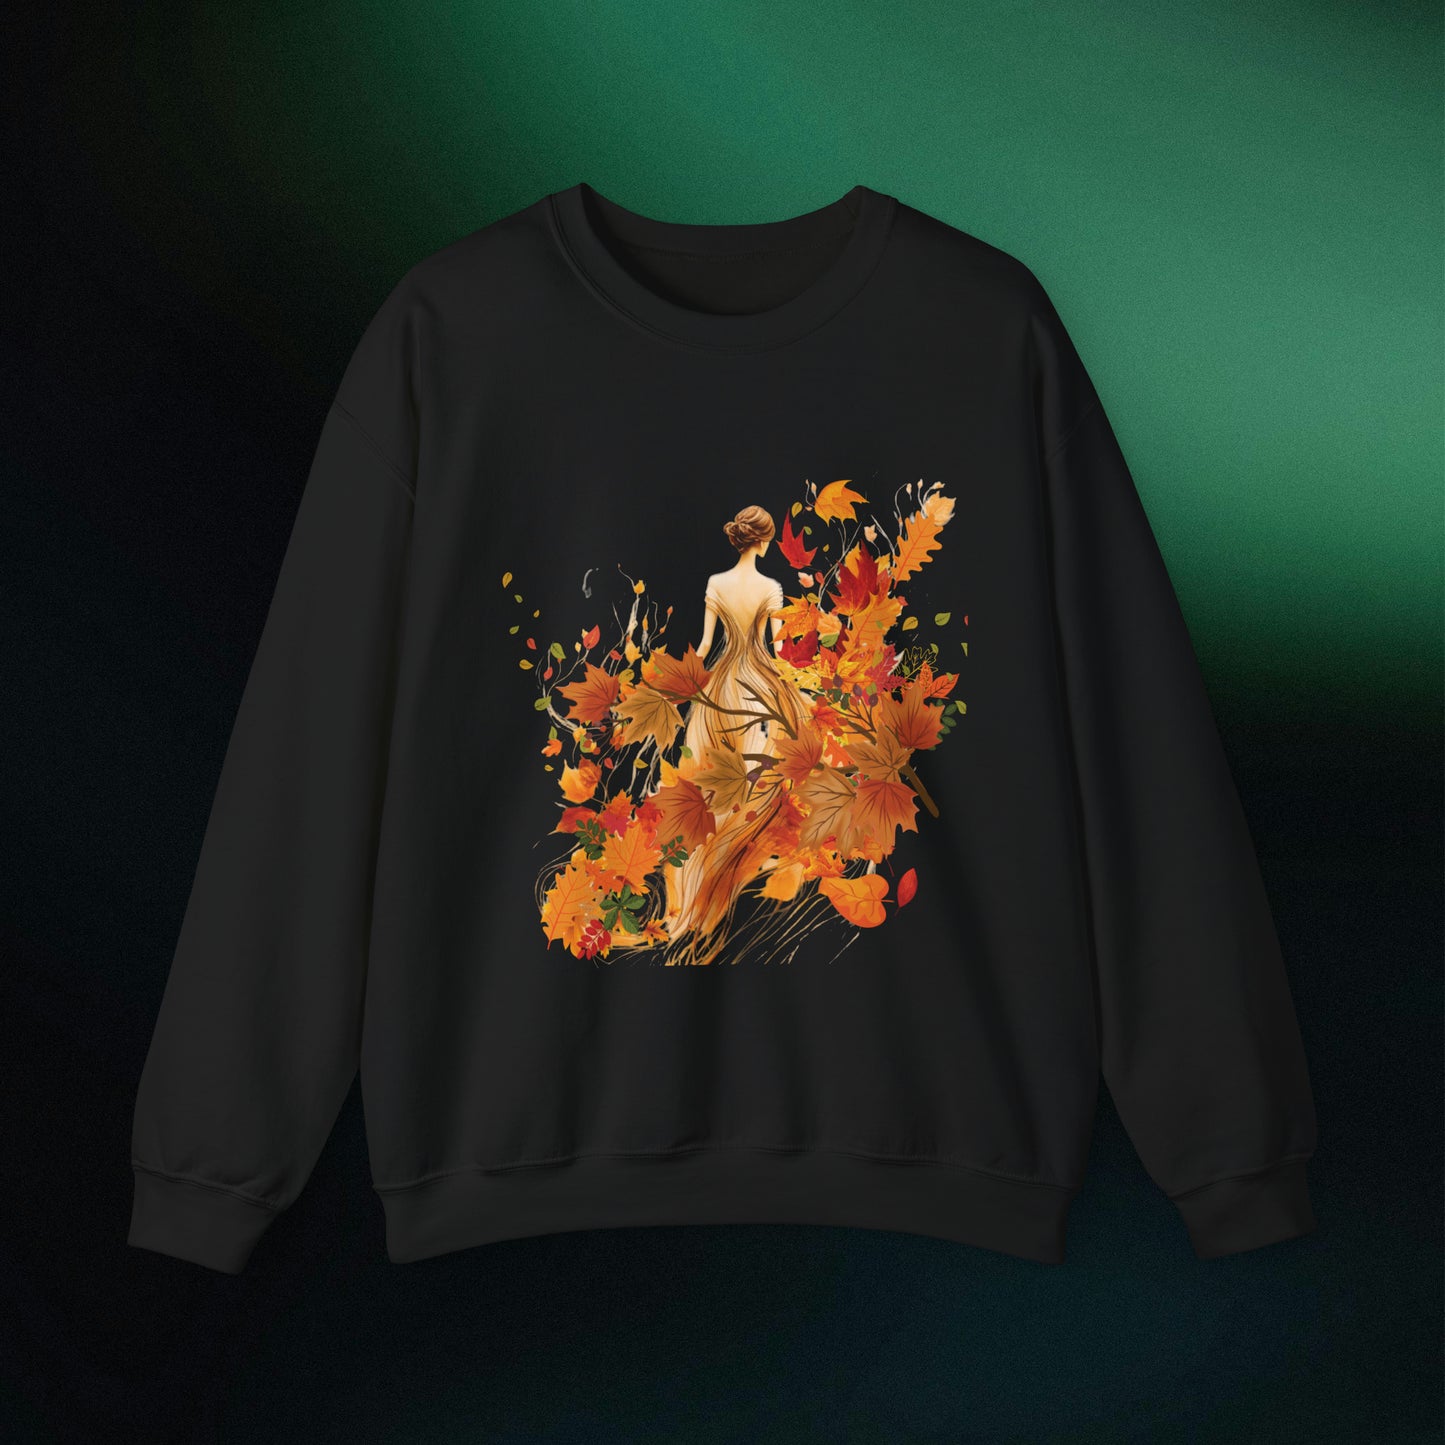 Whimsical Dreams in Autumn Hues: Romantic Dreamy Female Surrounded by Autumn Leaves Sweatshirt Sweatshirt S Black 